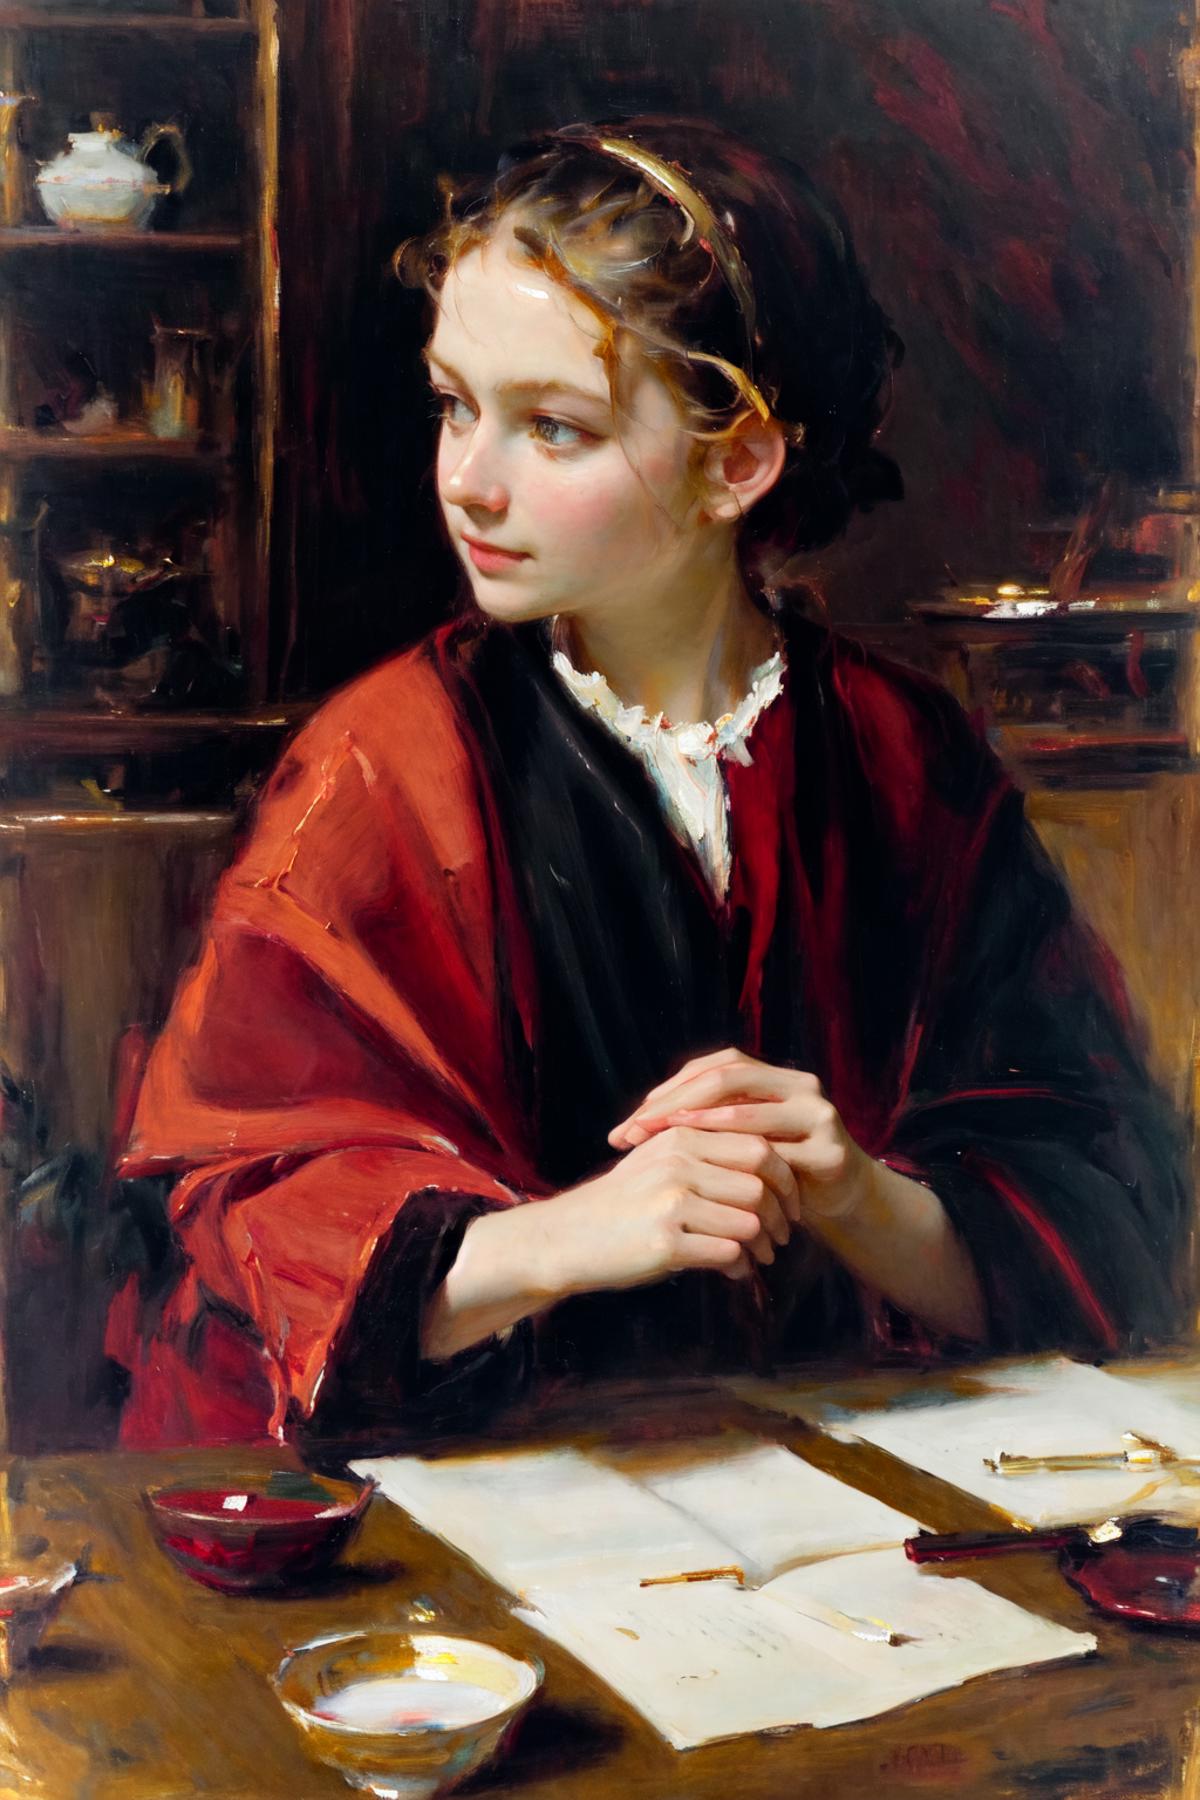 A portrait of a young woman in a red coat and black lace collar.